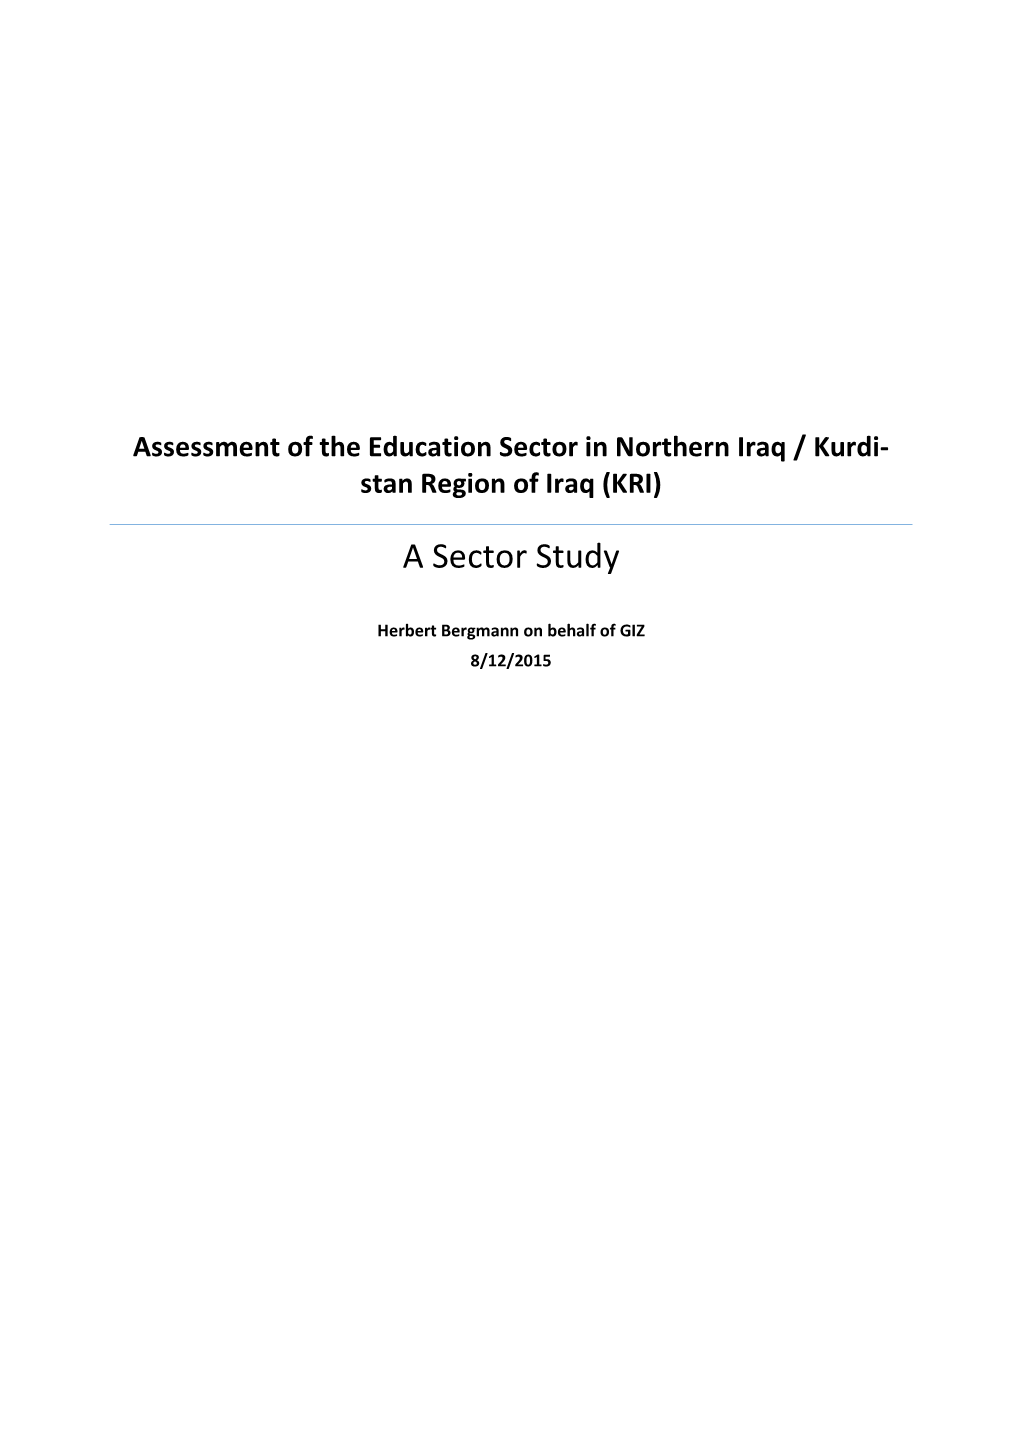 Assessment of the Education Sector in Northern Iraq Dec 2015 Final